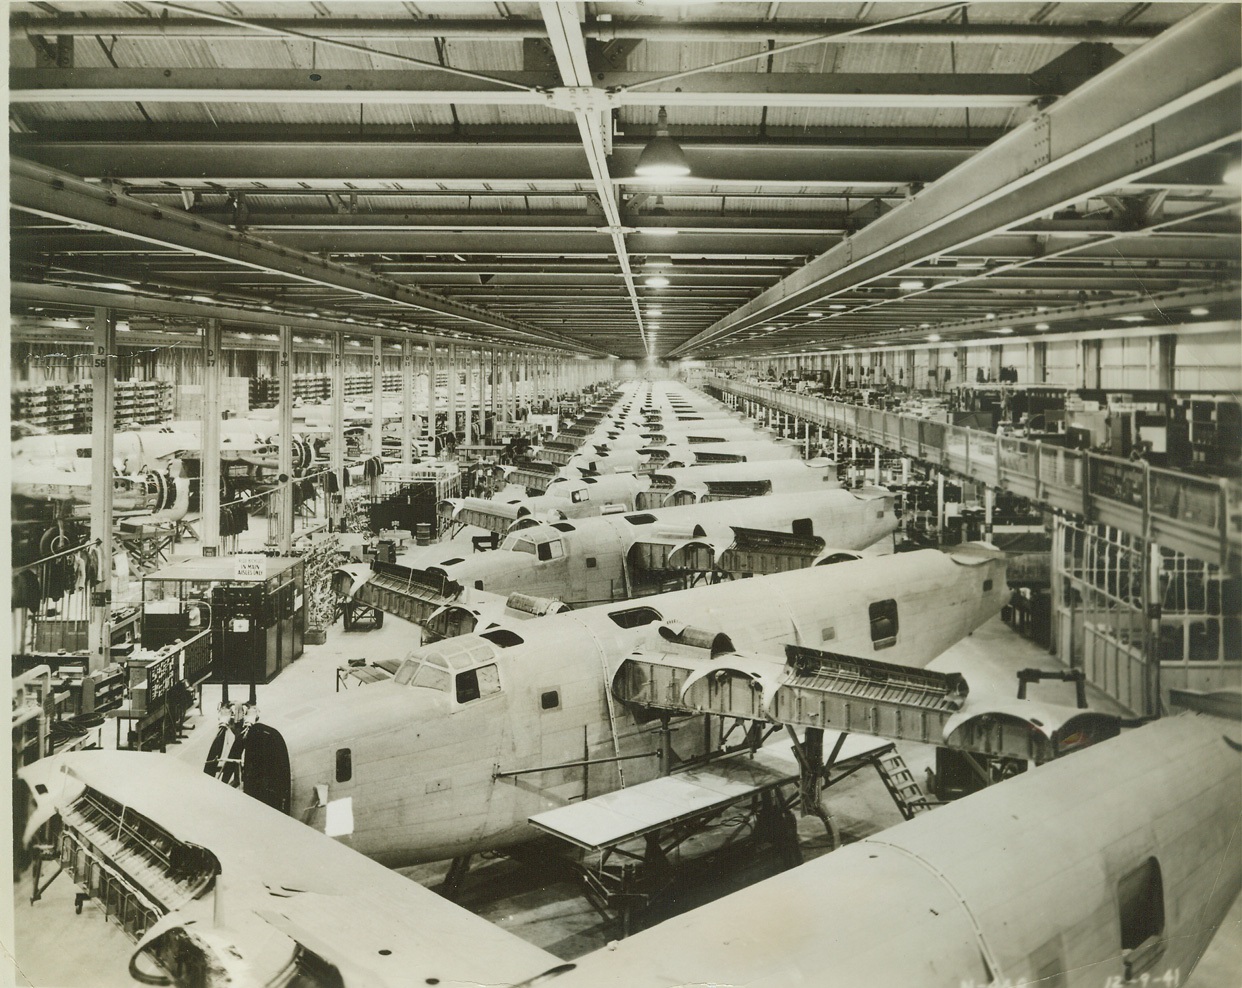 Giant Bombers in Assembly-Line Production, 3/15/1942. SAN DIEGO, CALIF. -- Giant four-motored bombers on a moving assembly line are the Consolidated Aircraft Corporation's answer to the wartime demand for "more planes faster." Almost as far as the eye can reach the line moves along until fully completed planes roll off ready to do battle.  Credit: (ACME);